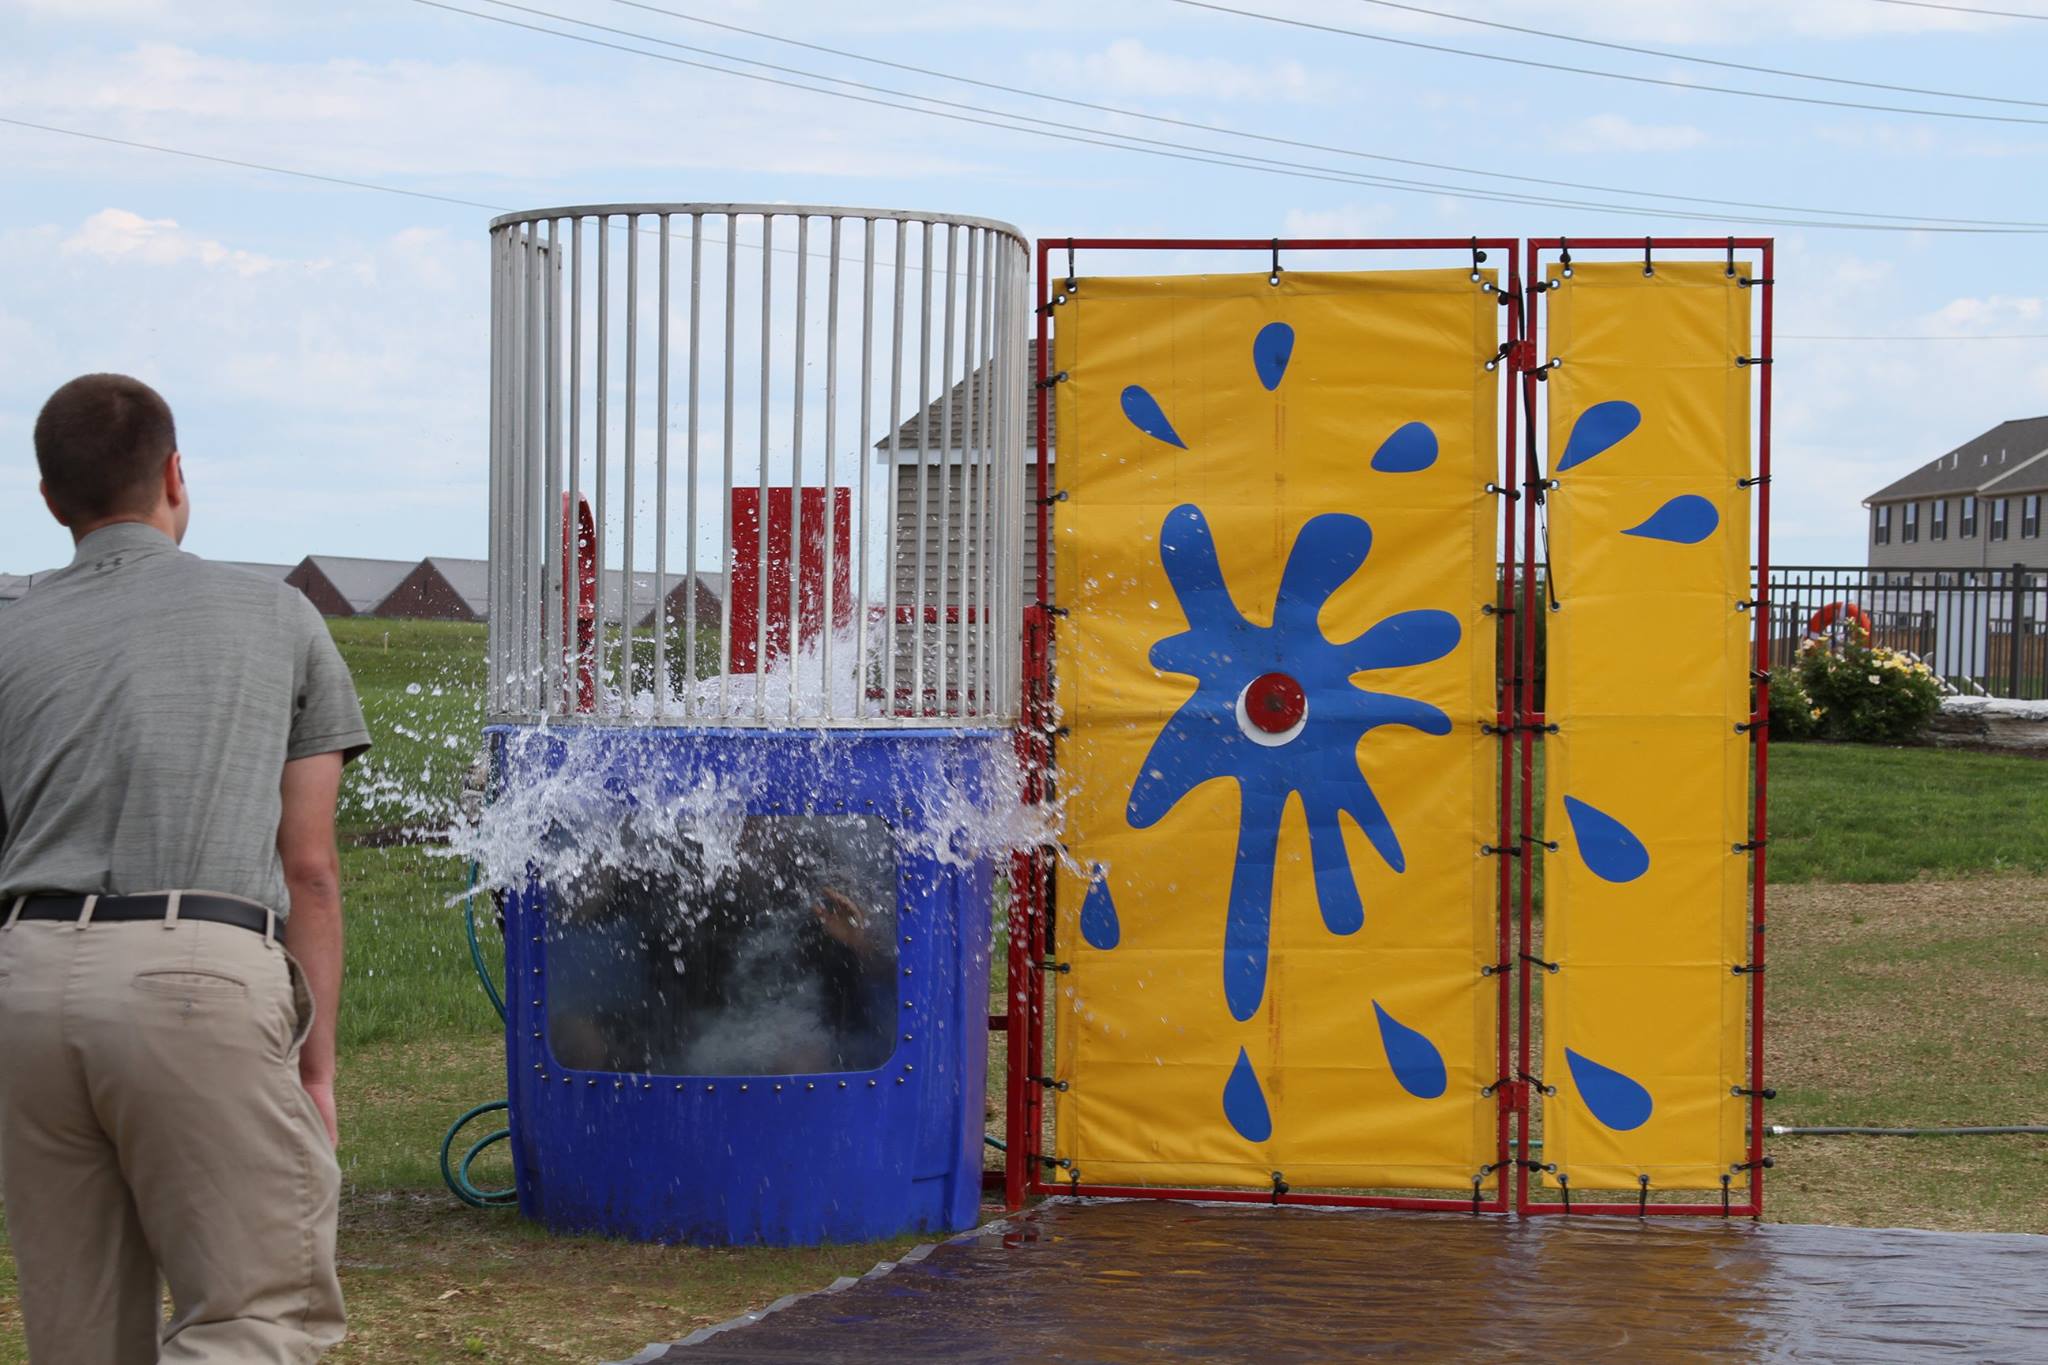 jeff (CEO) getting dunked by chris Pastel (CFO) -